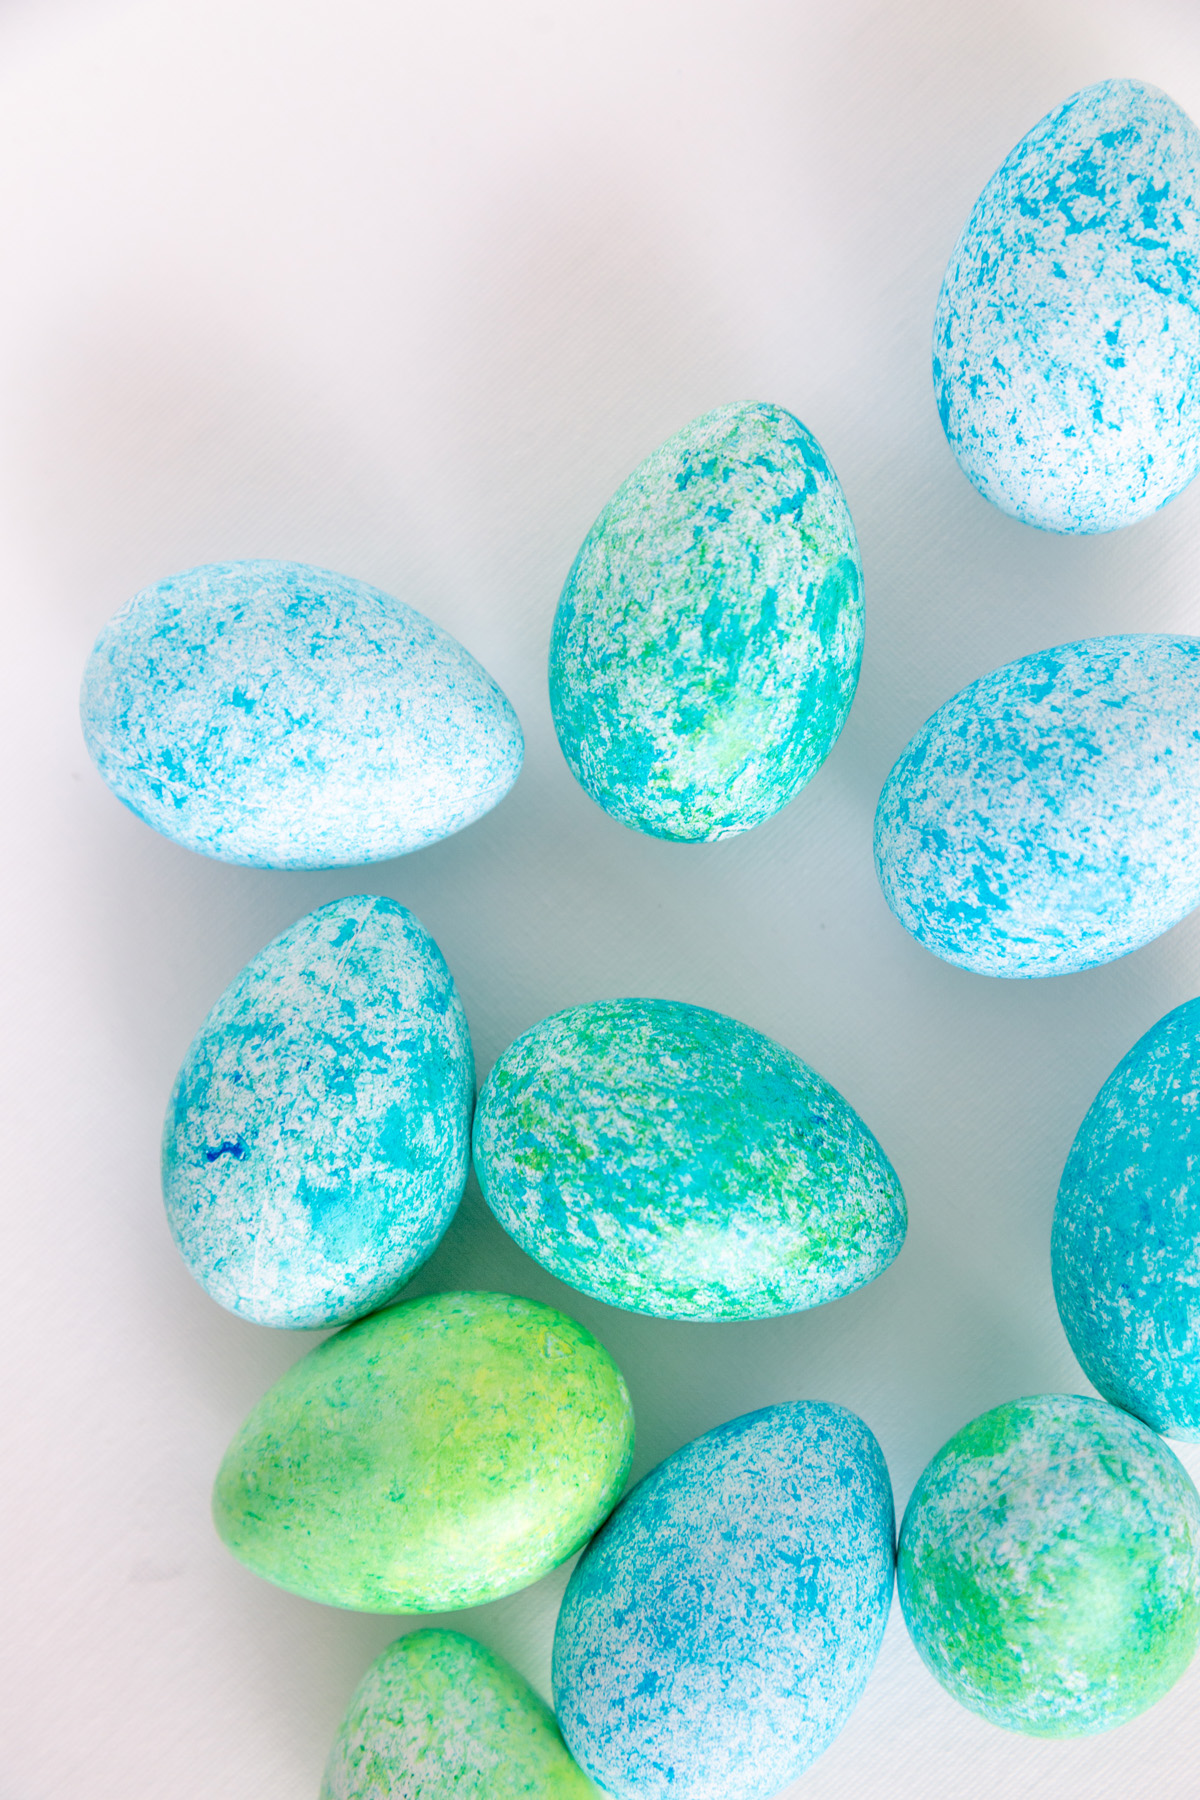 How to Dye Easter Eggs with Rice and Food Coloring